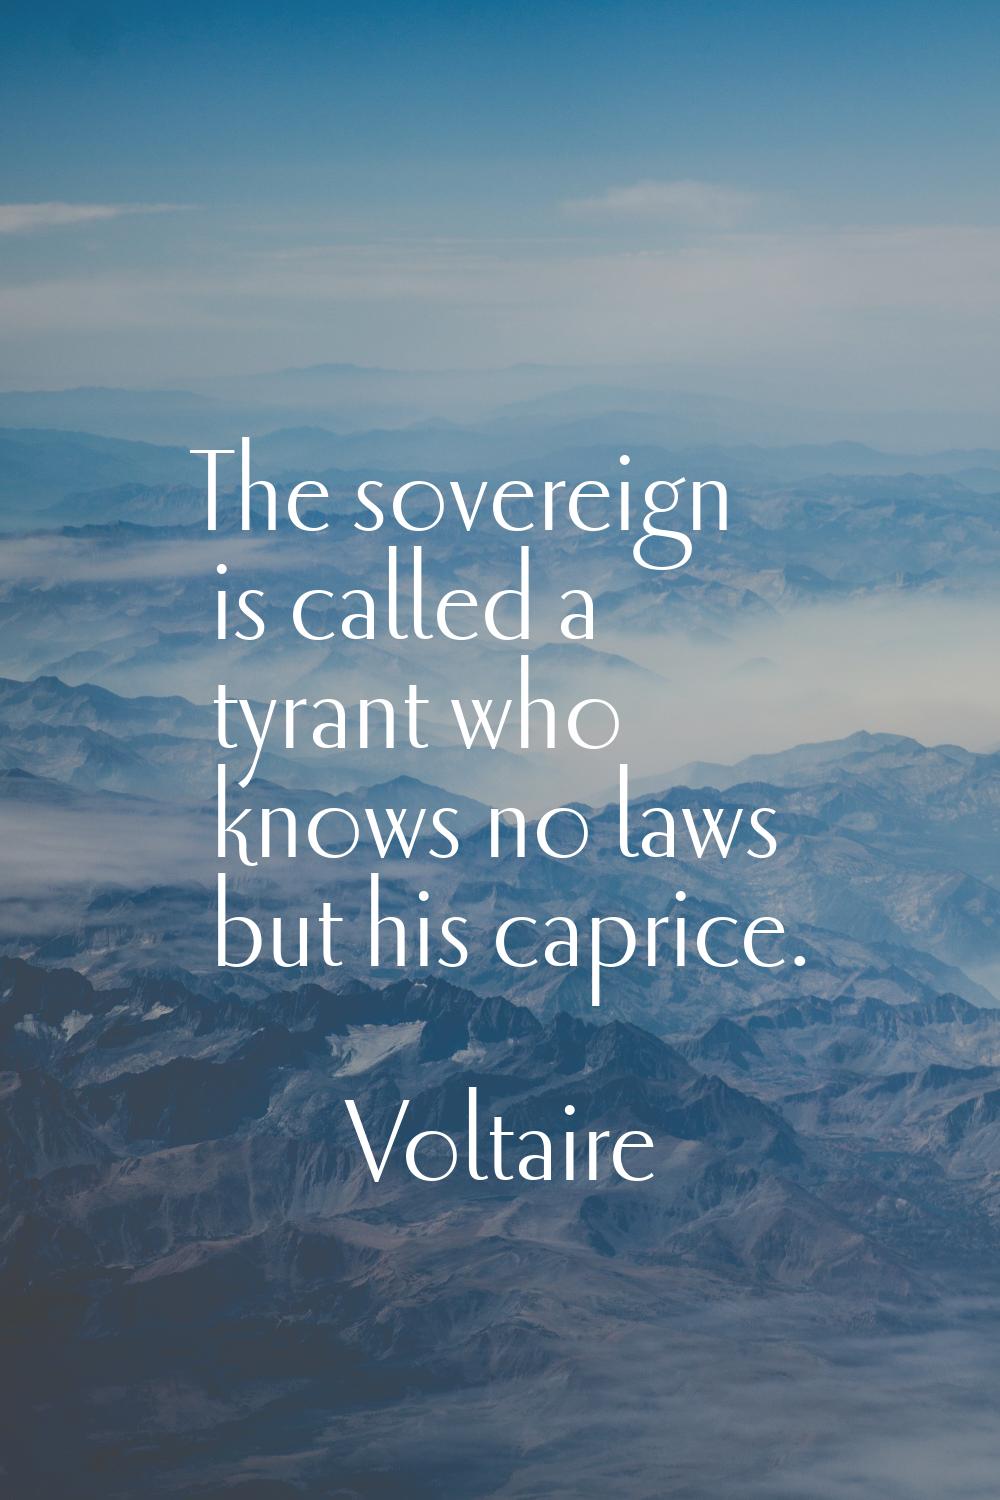 The sovereign is called a tyrant who knows no laws but his caprice.